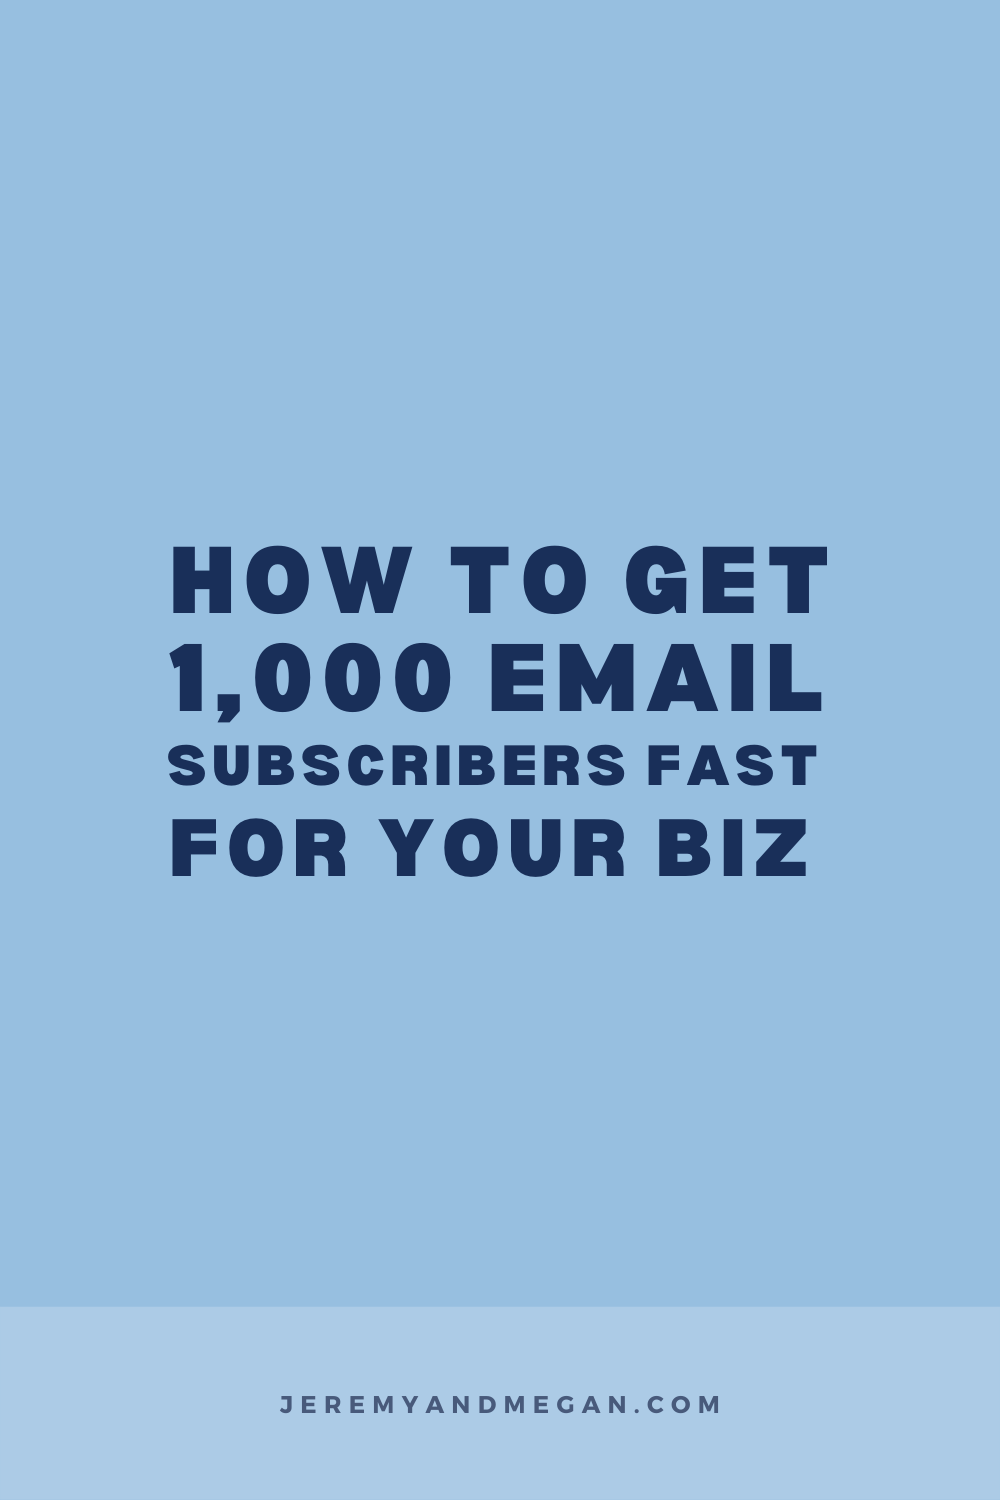 How to grow your email list and get 1,000 subscribers fast as a digital product based business shared by Megan Martin